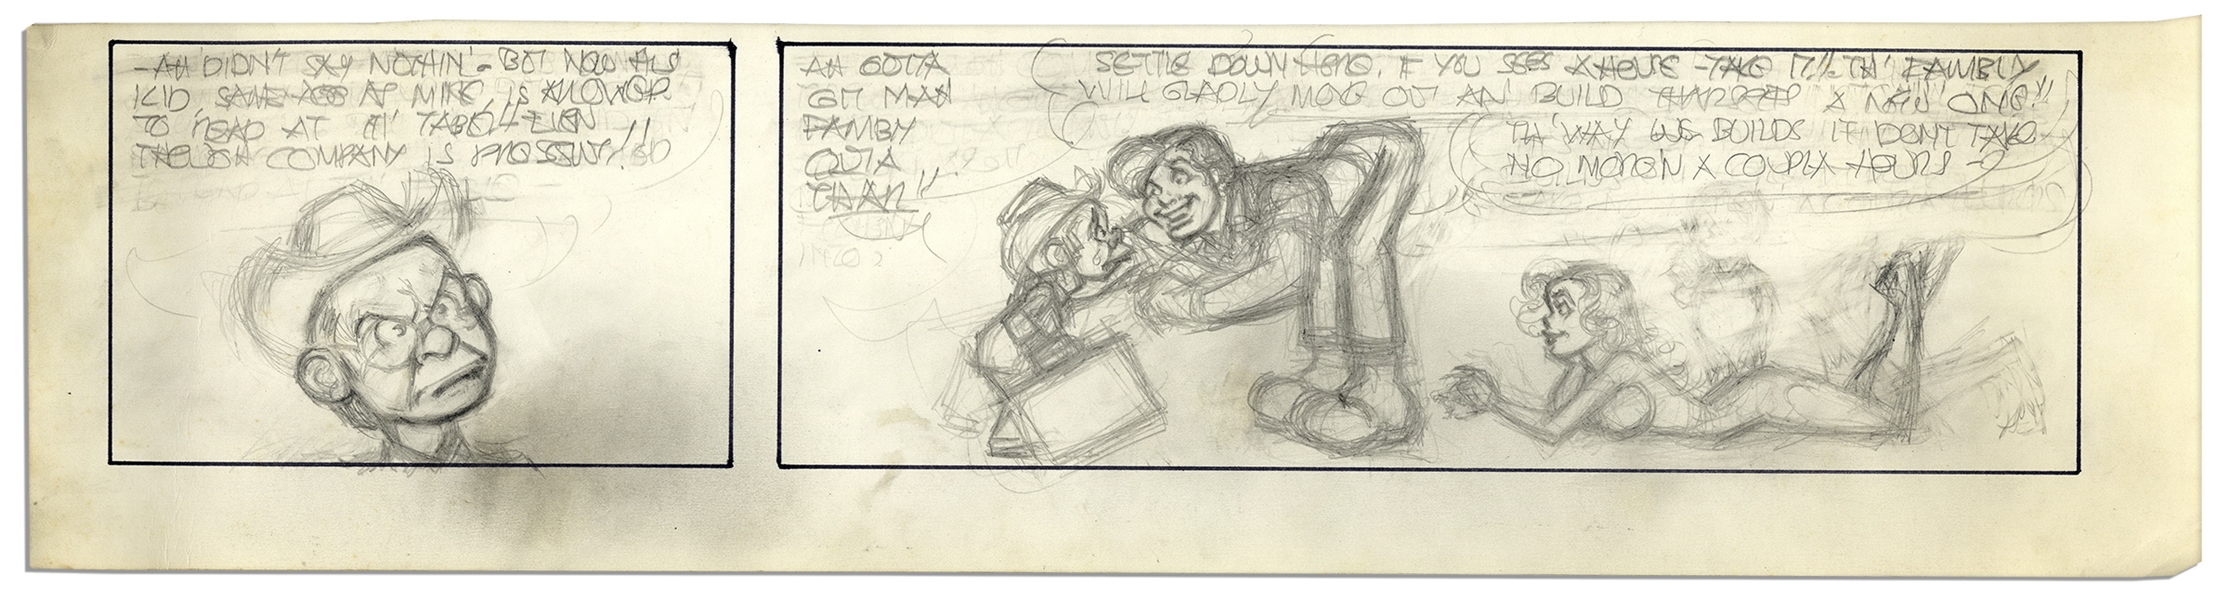 ''Li'l Abner'' Unfinished Comic Strip by Al Capp in Pencil -- Undated Strip Features Li'l Abner & Daisy Mae -- 22.75'' x 6'' -- Very Good -- From the Al Capp Estate